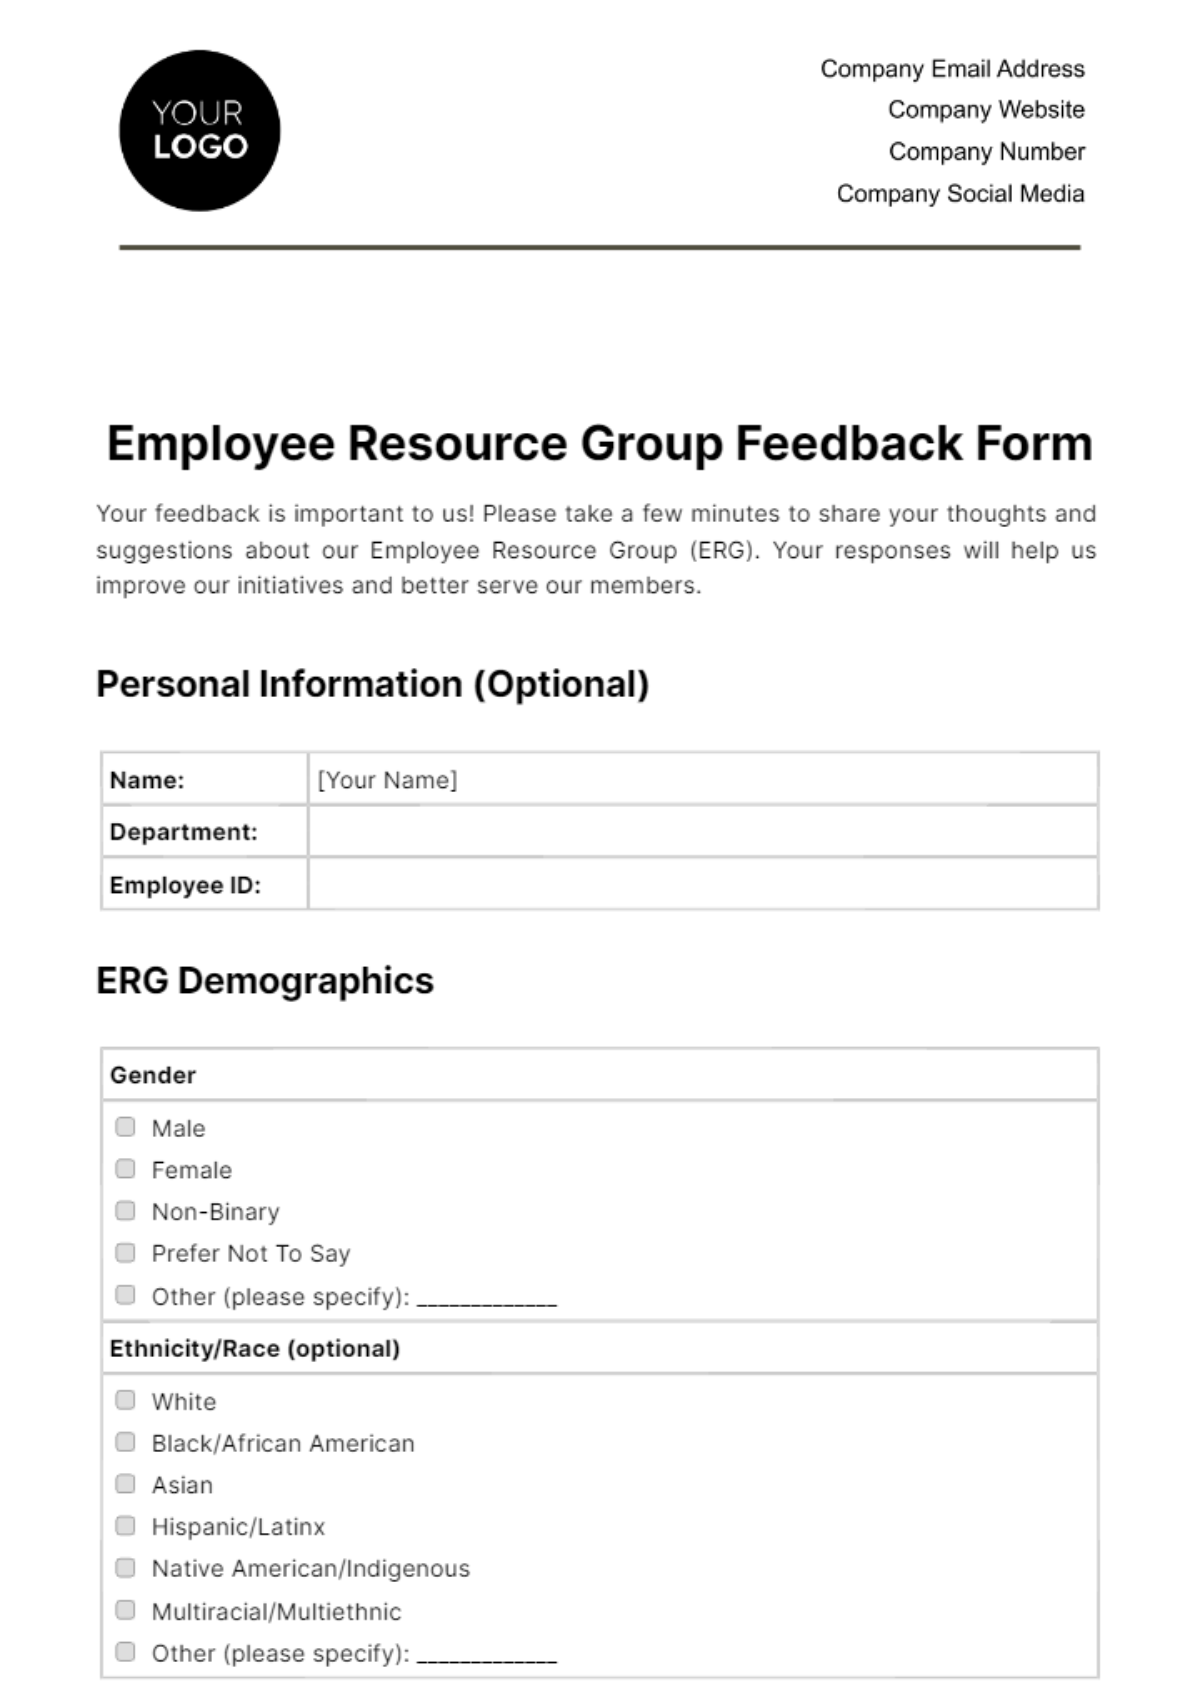 Free Employee Resource Group Feedback Form HR Template